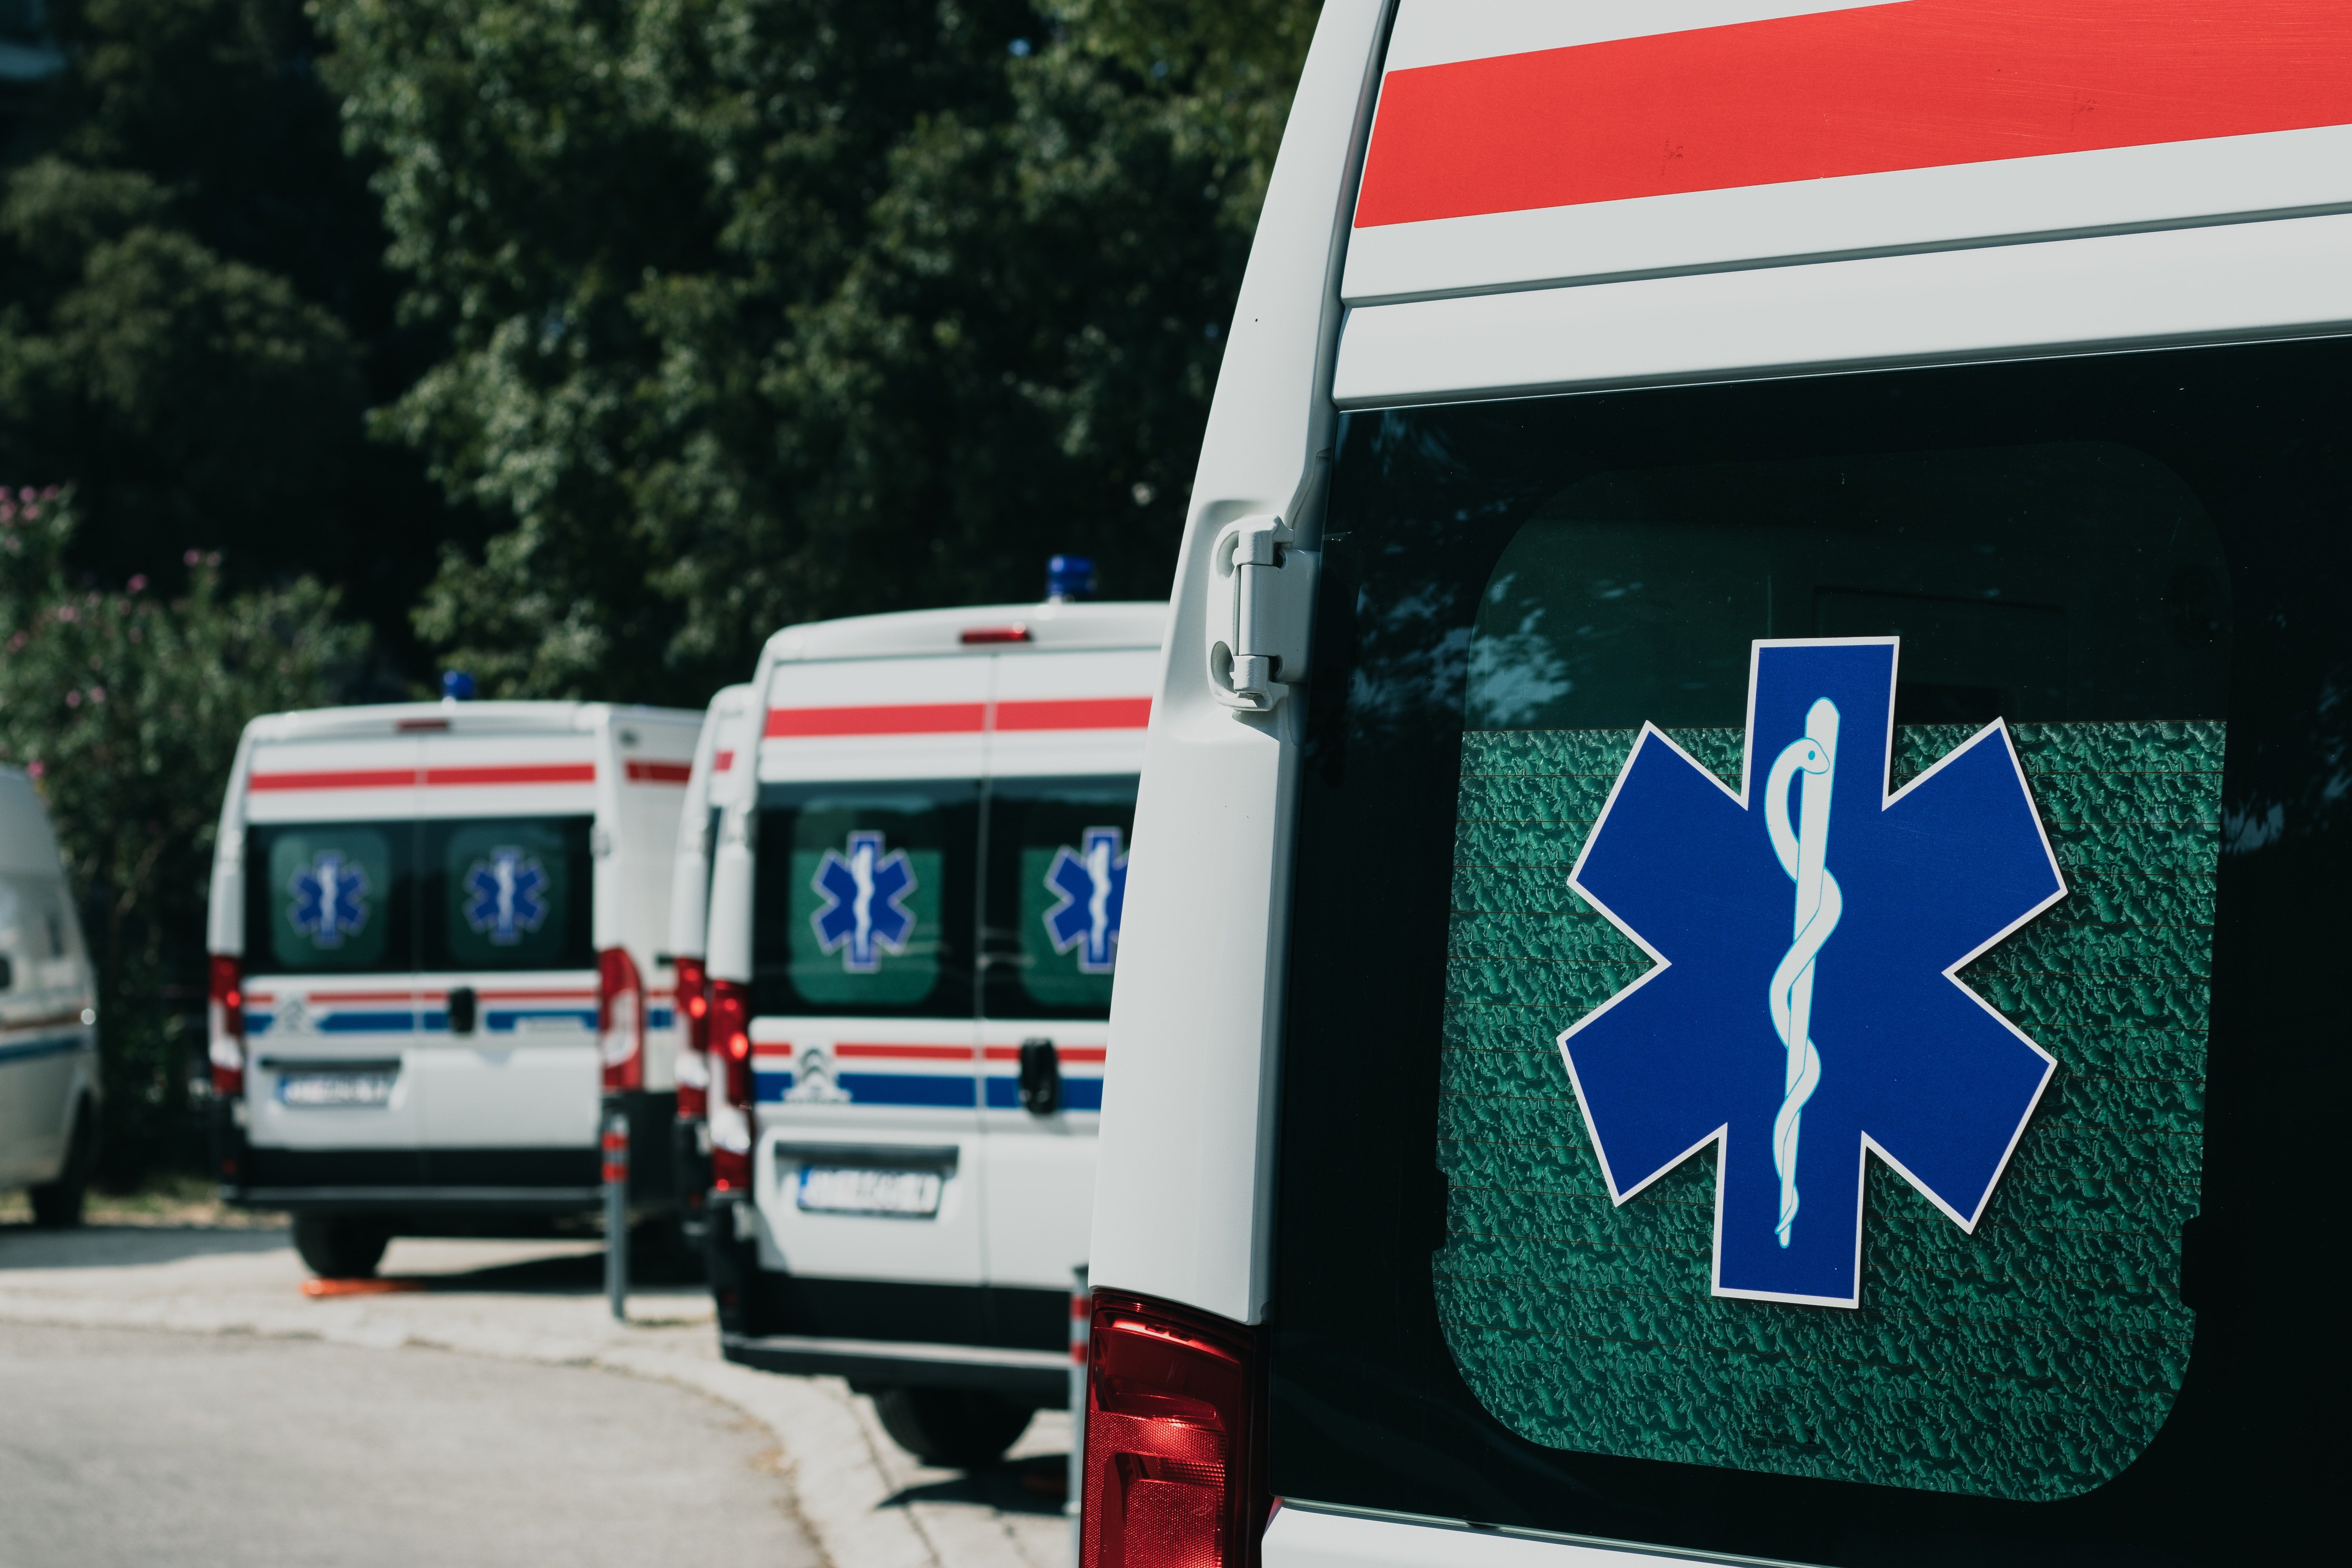  After the boys left, Mr. Monjack called an ambulance for the homeless man | Source: Pexels